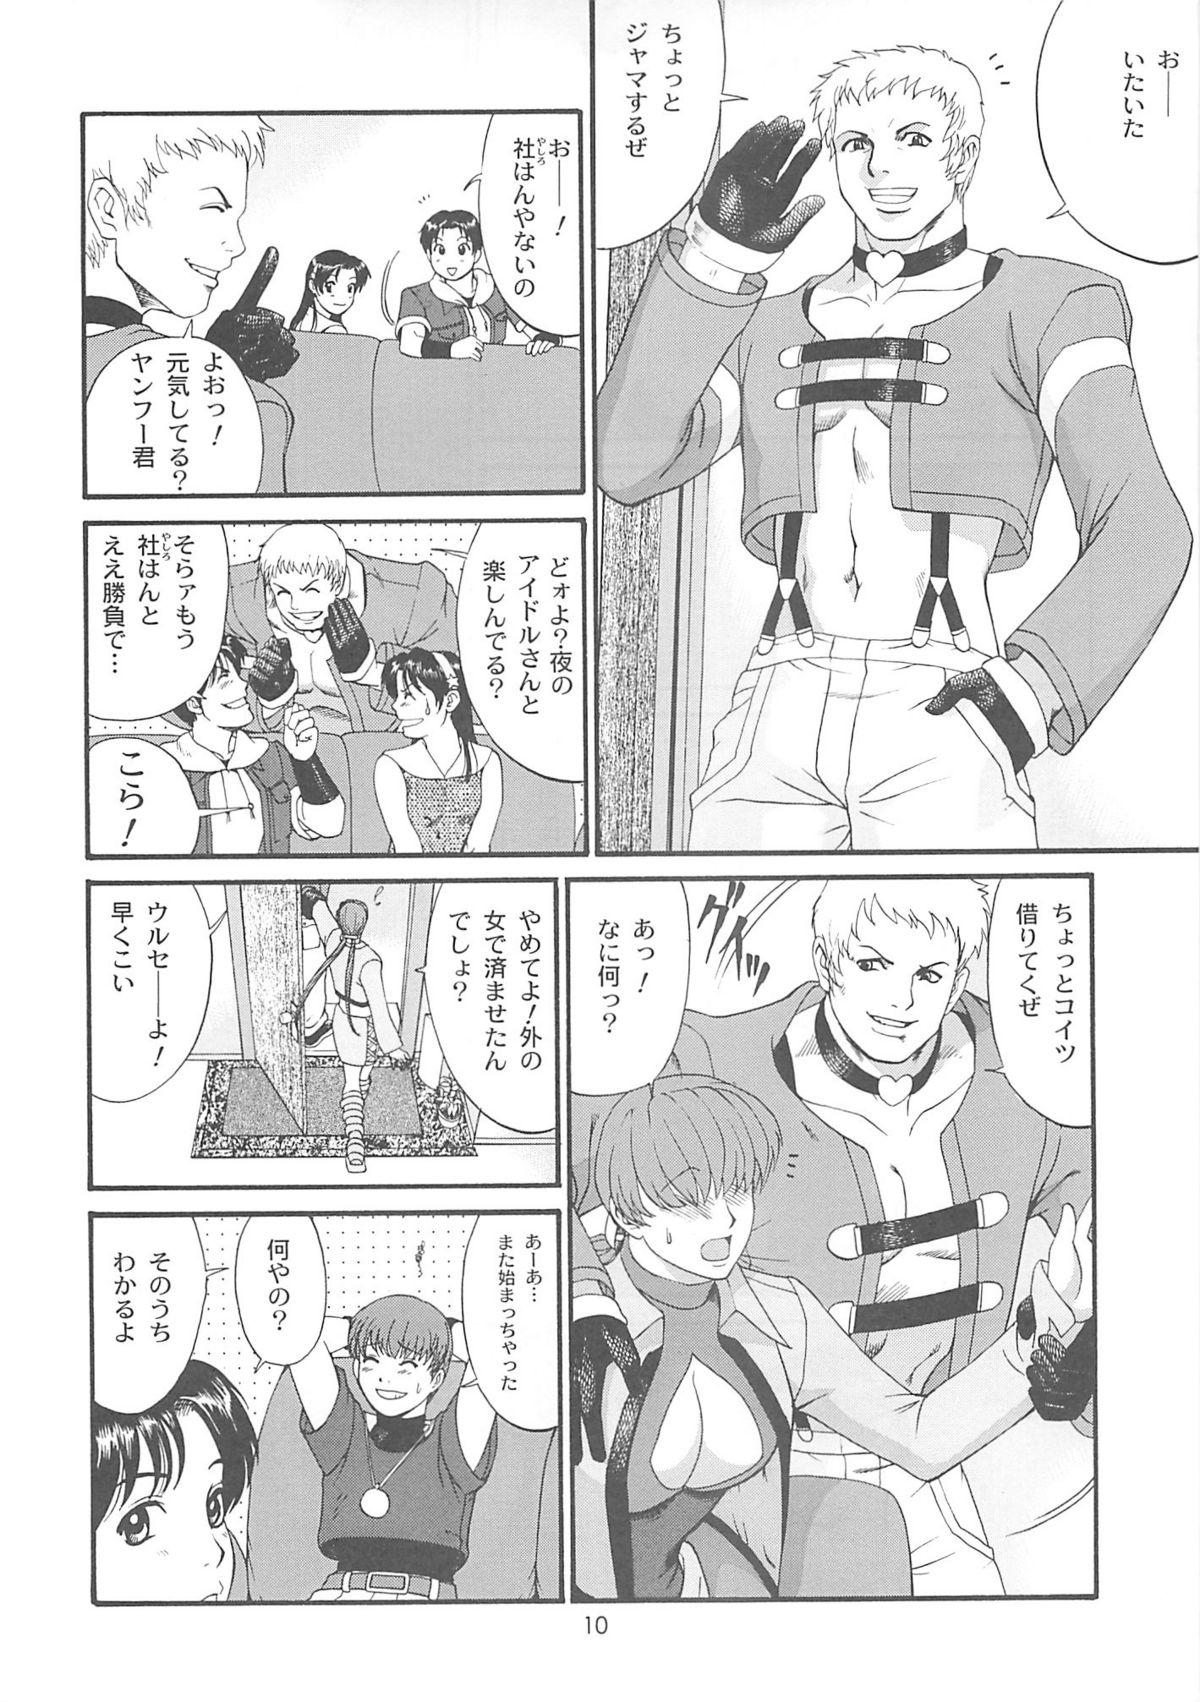 (C63) [Saigado] The Athena & Friends 2002 (King of Fighters) page 9 full